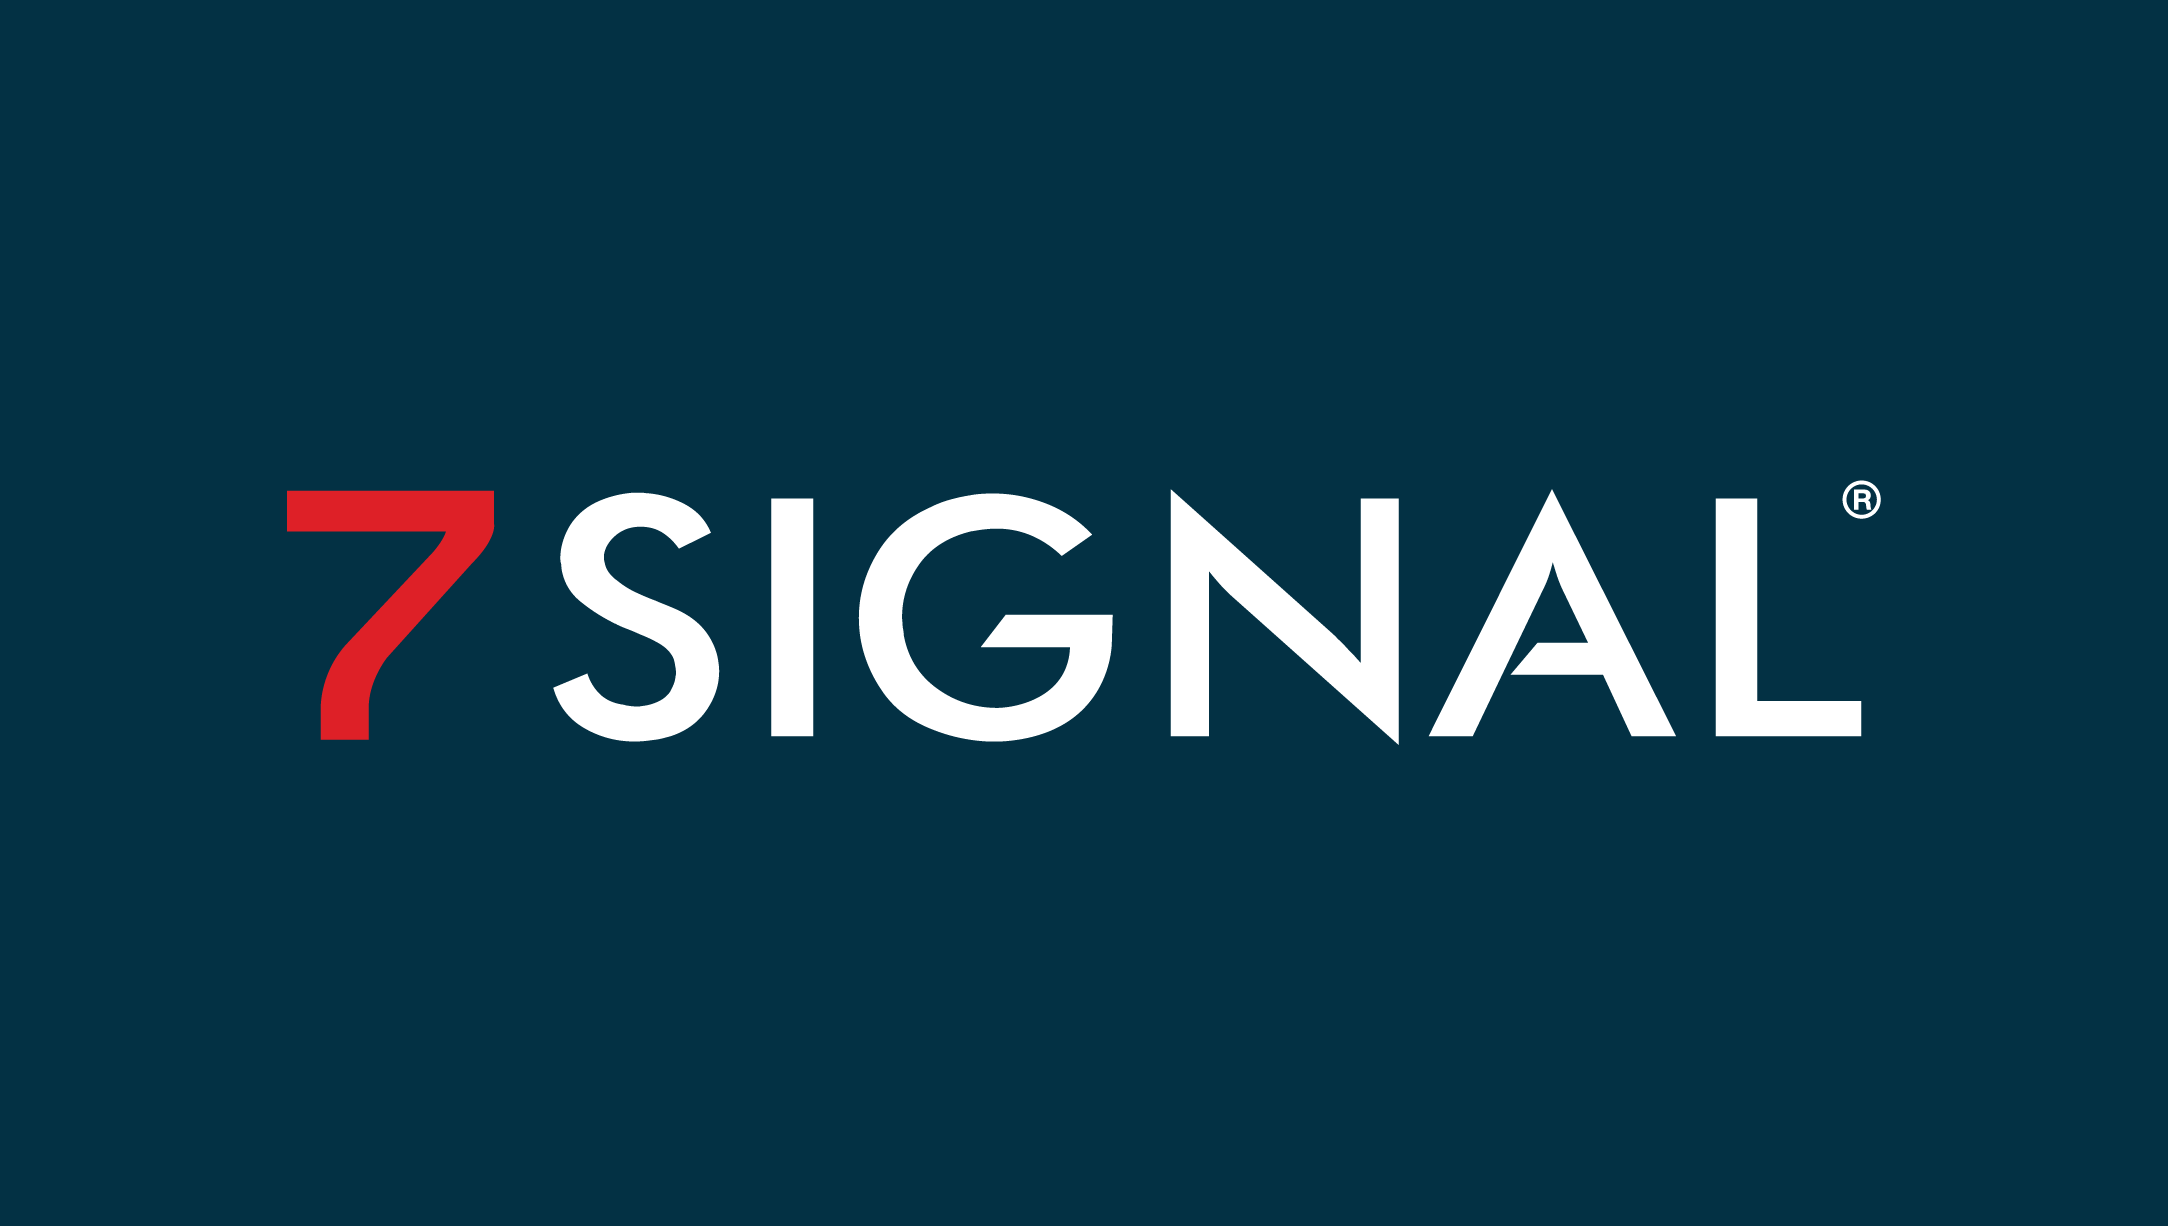 7SIGNAL-brand-guidelines-logo